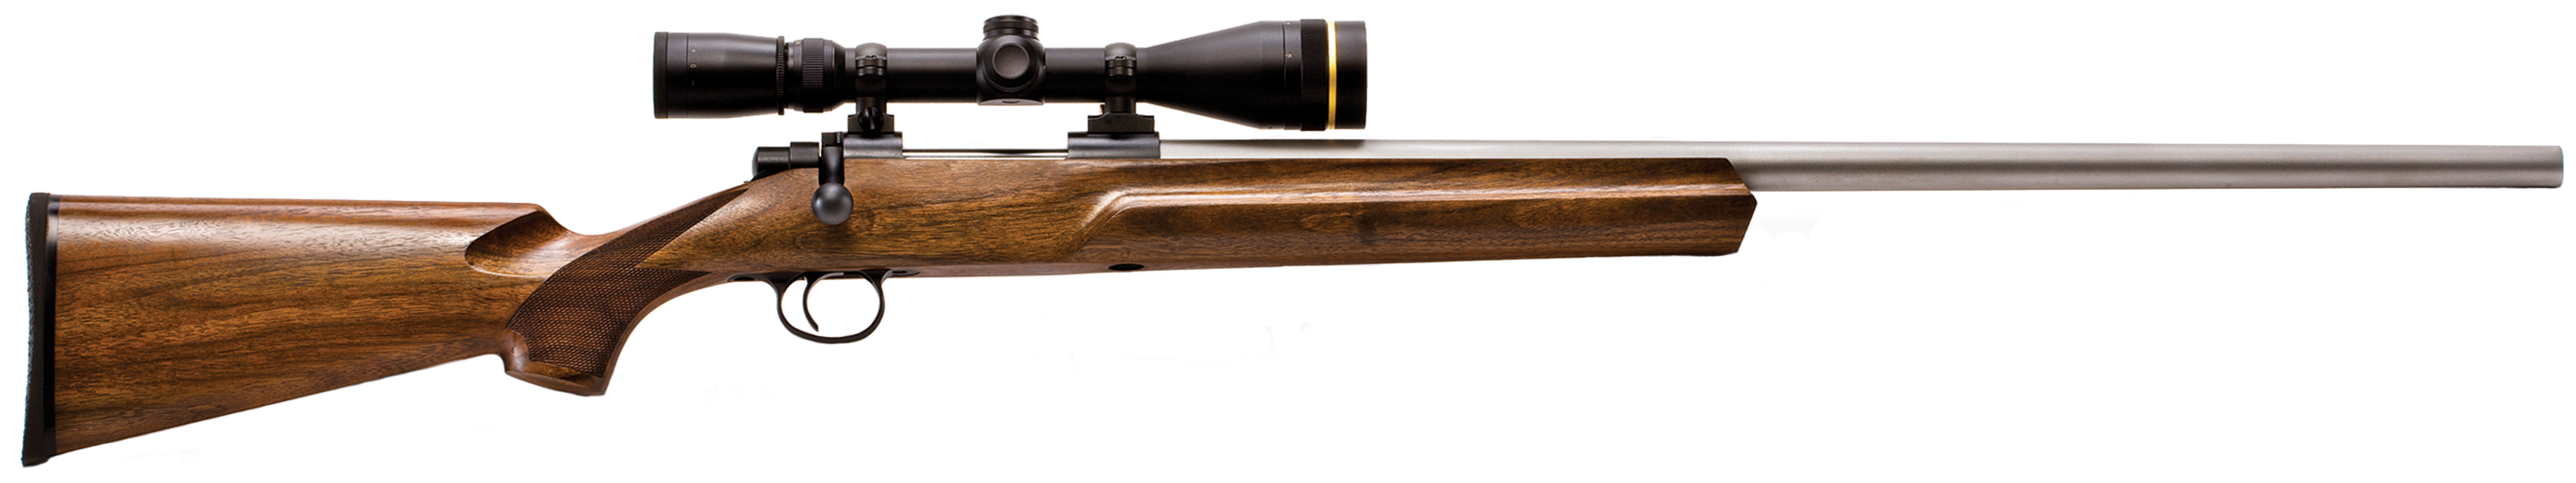 Sniper Rifle Background PNG